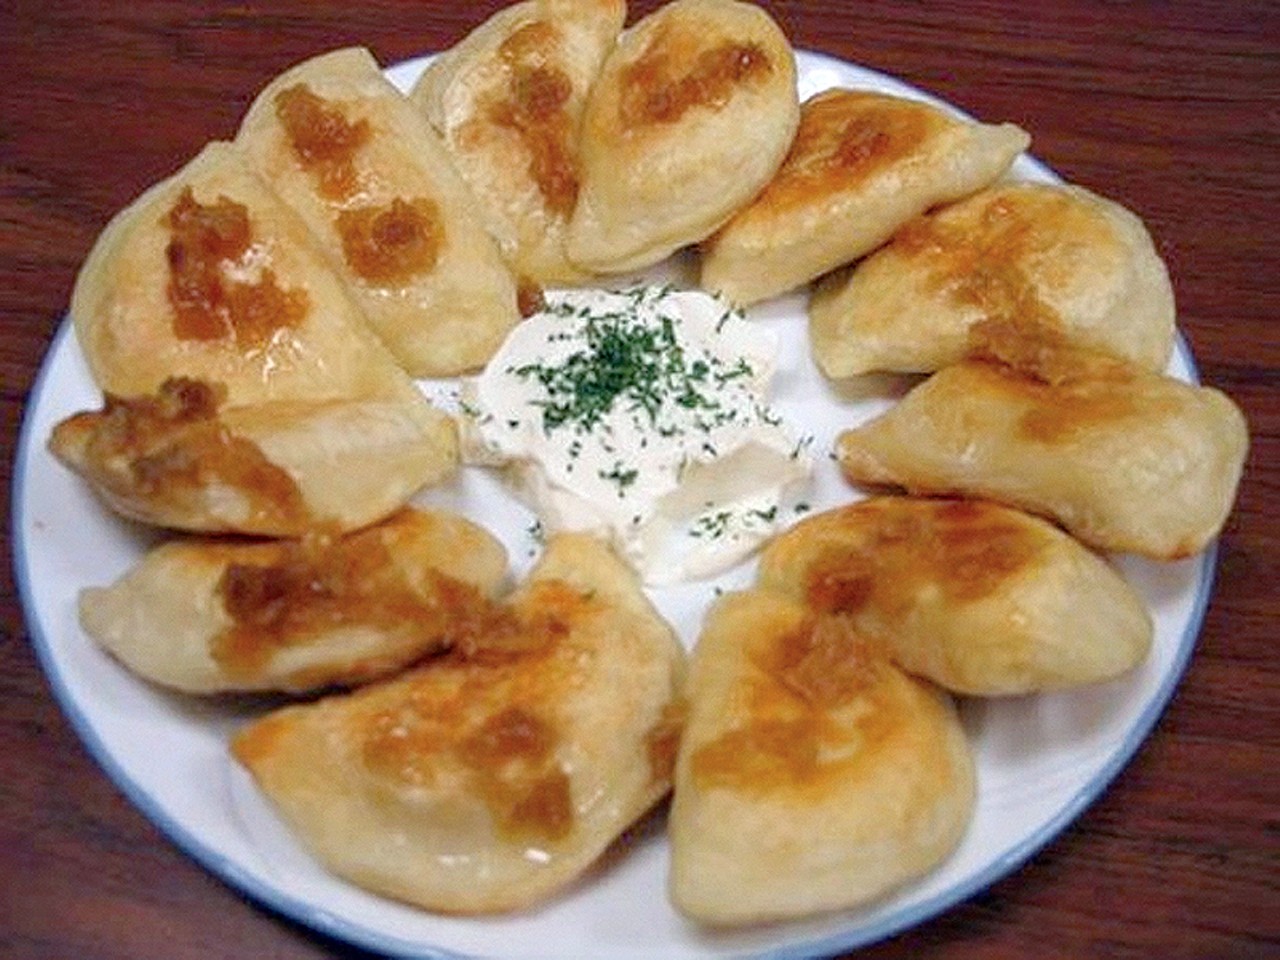 Pierogi
What: Those wonderful potato-and-cheese stuffed dumplings
Why: Cleveland's Eastern European immigrants brought them generations ago, and they've been a beloved staple of the city's cuisine ever since
Where: Your first stop should be Sokolowski's University Inn, whose name has become synonymous with the dish. Also hit Parma's Perla Homemade Delight, where dozens of flavors are sold by the, well, dozen